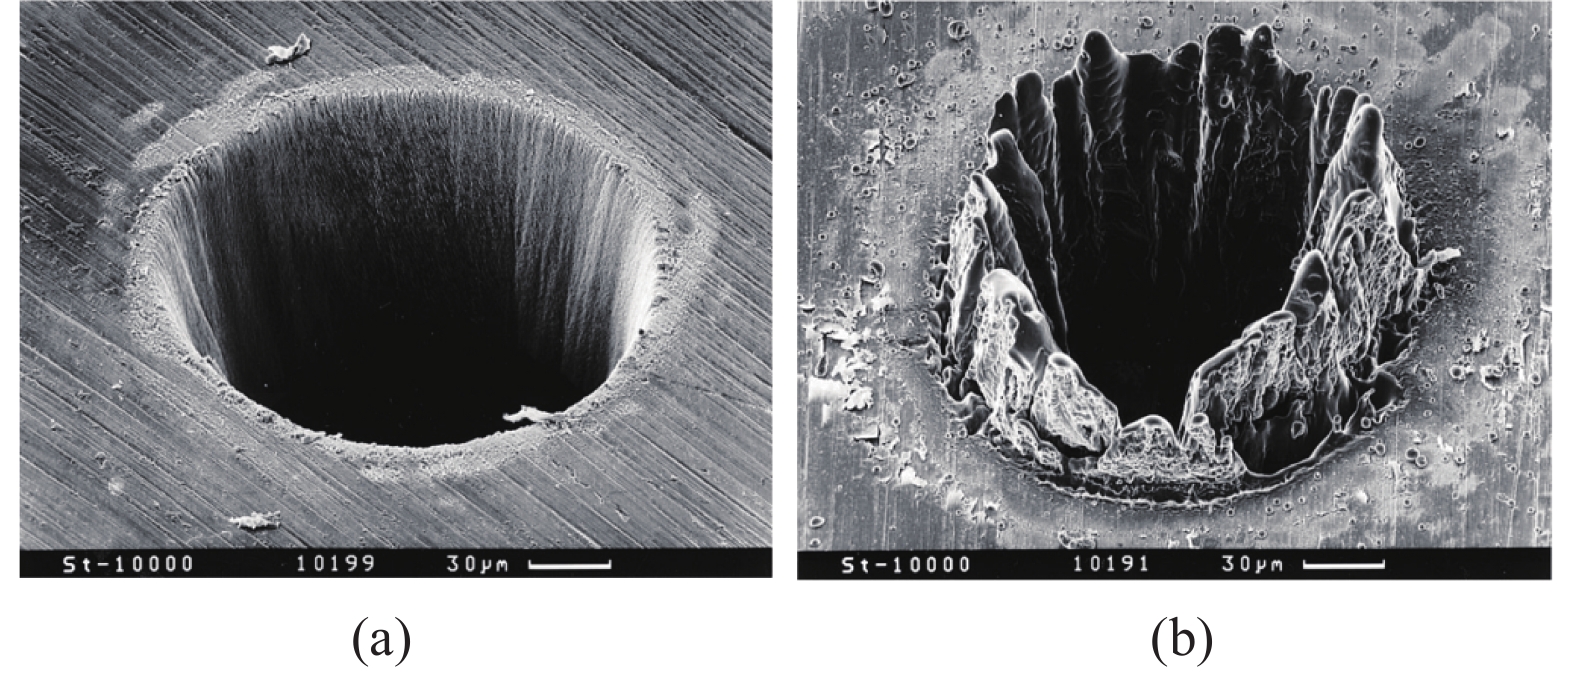 SEM images of holes drilled in a 100 μm thick steel foil with laser pulses of (a) 200 fs and (b) 3.3 ns, respectively[10]